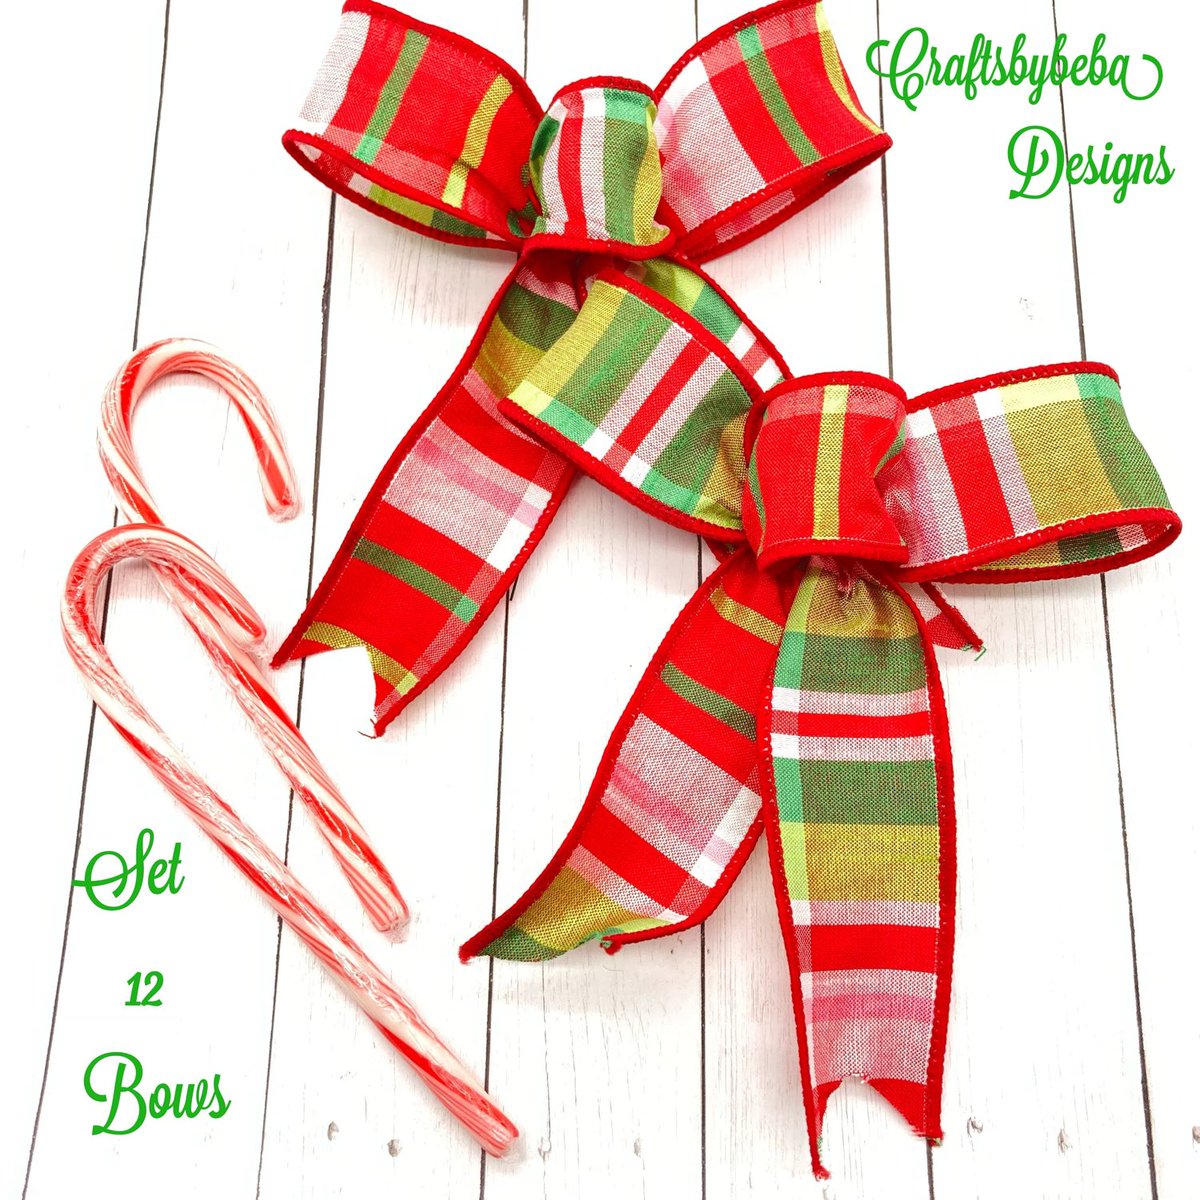 Excited to share this item from my #etsy shop: Christmas Tree Bows / Set 12 Bows / Dupioni Plaid Christmas Decorative Bows / Christmas Red and Green Plaid Bows etsy.me/3KVx60p
#etsyseller #etsyshop #etsyme #christmastreebows #plaidchristmas #diybows #bizonline #smsllbiz